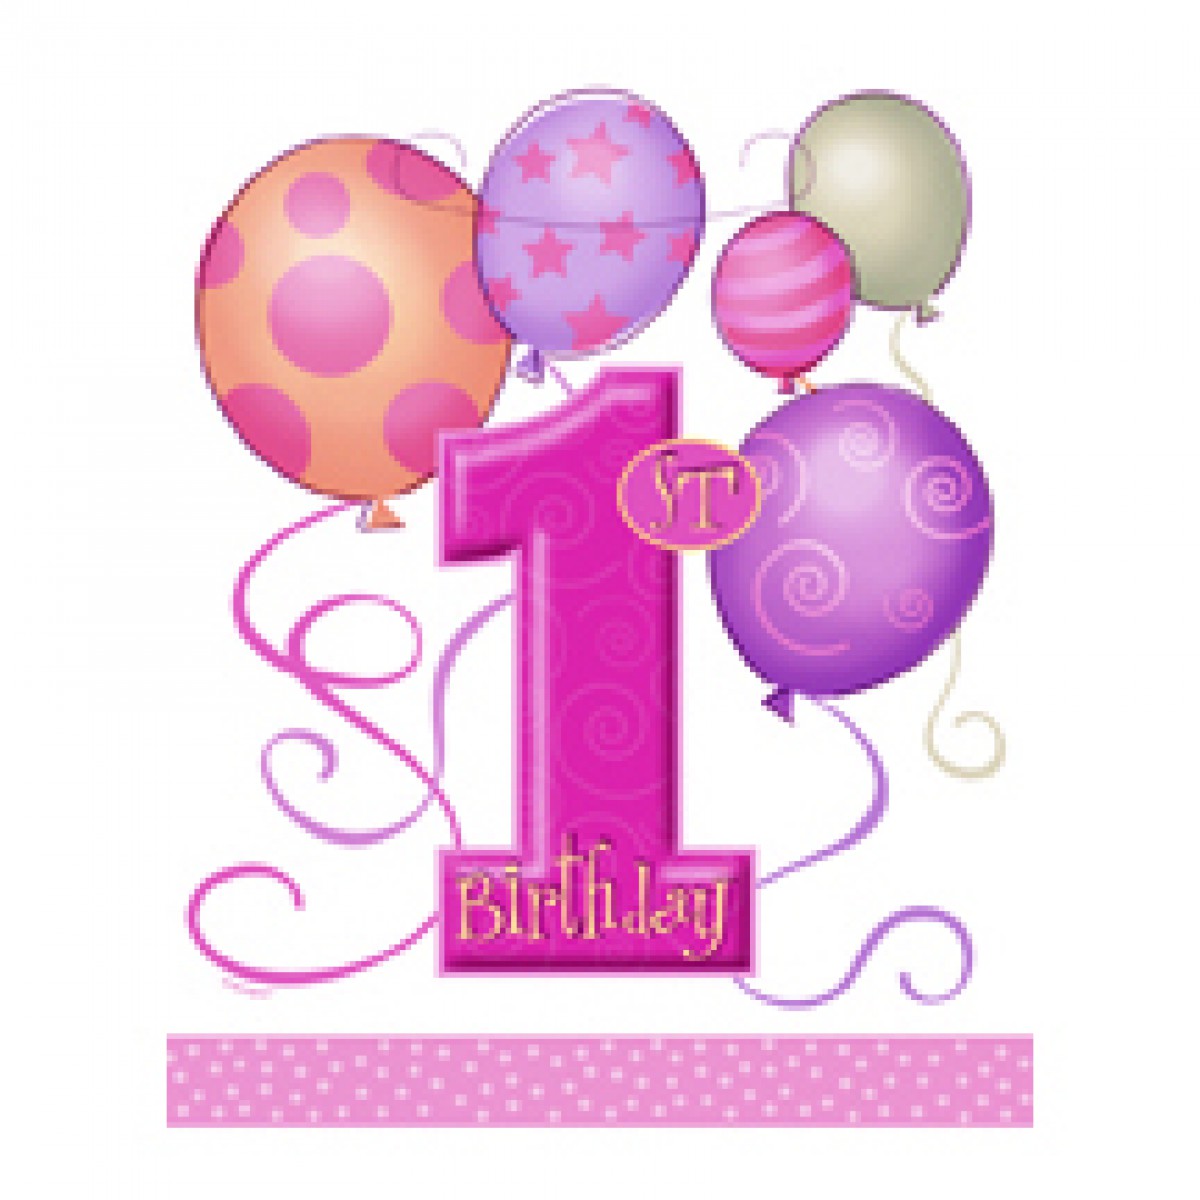 1st Birthday Balloons Pink Cutouts - Party decor and rentals for 